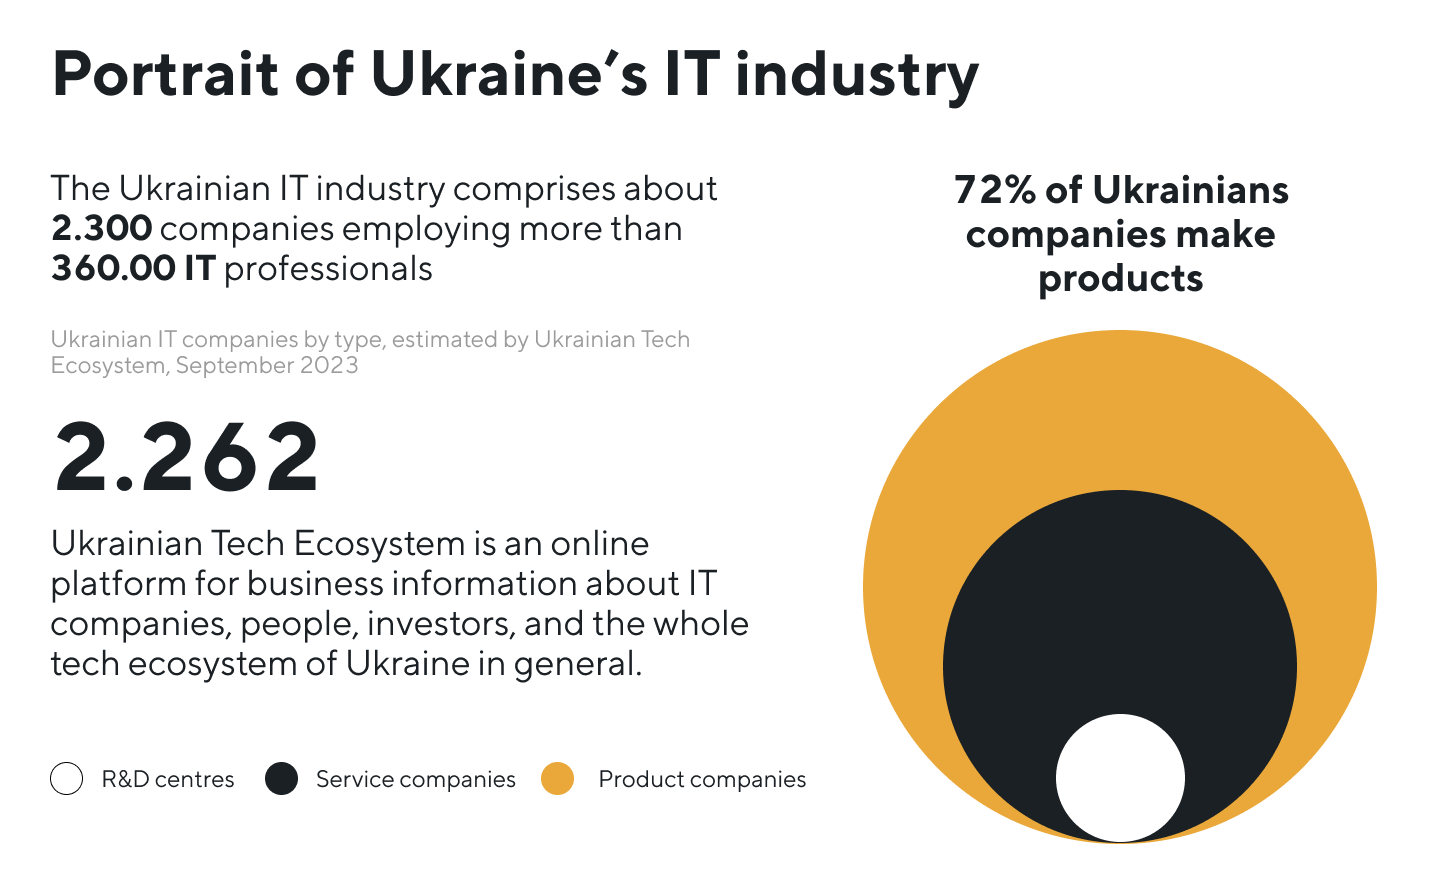 Outsourcing services and software development services by Ukrainian companies